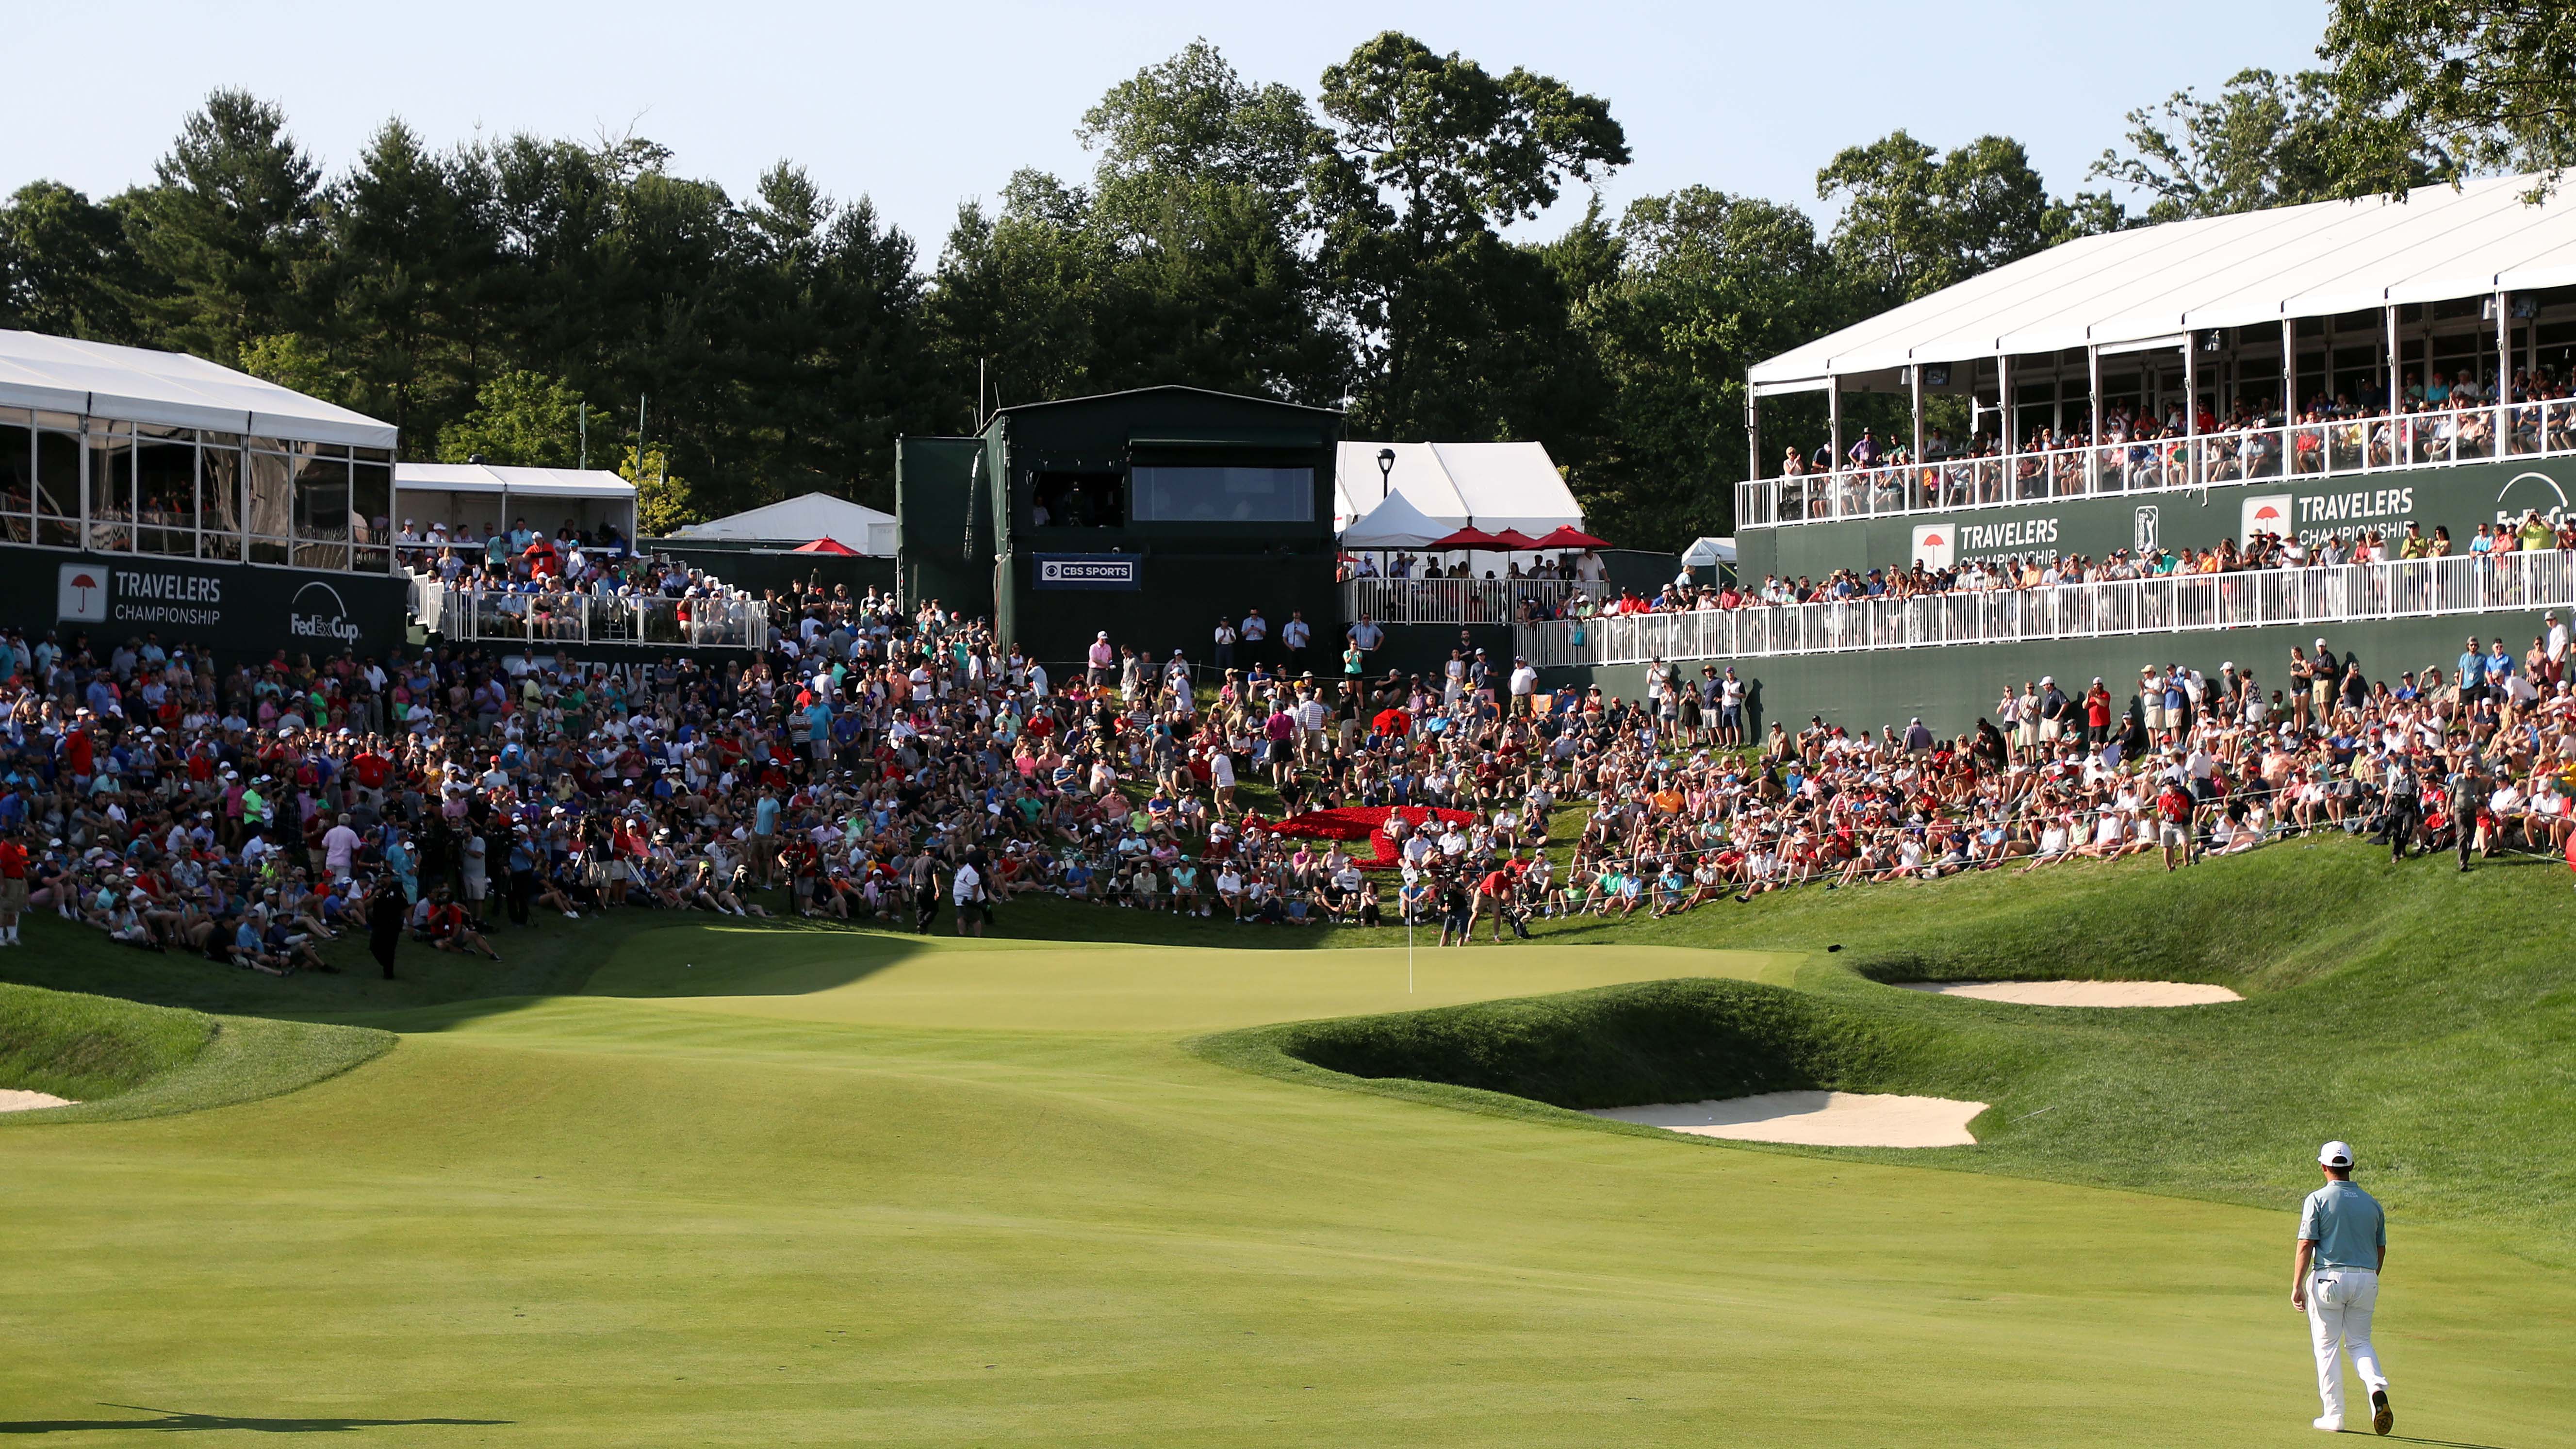 The Preview Travelers Championship